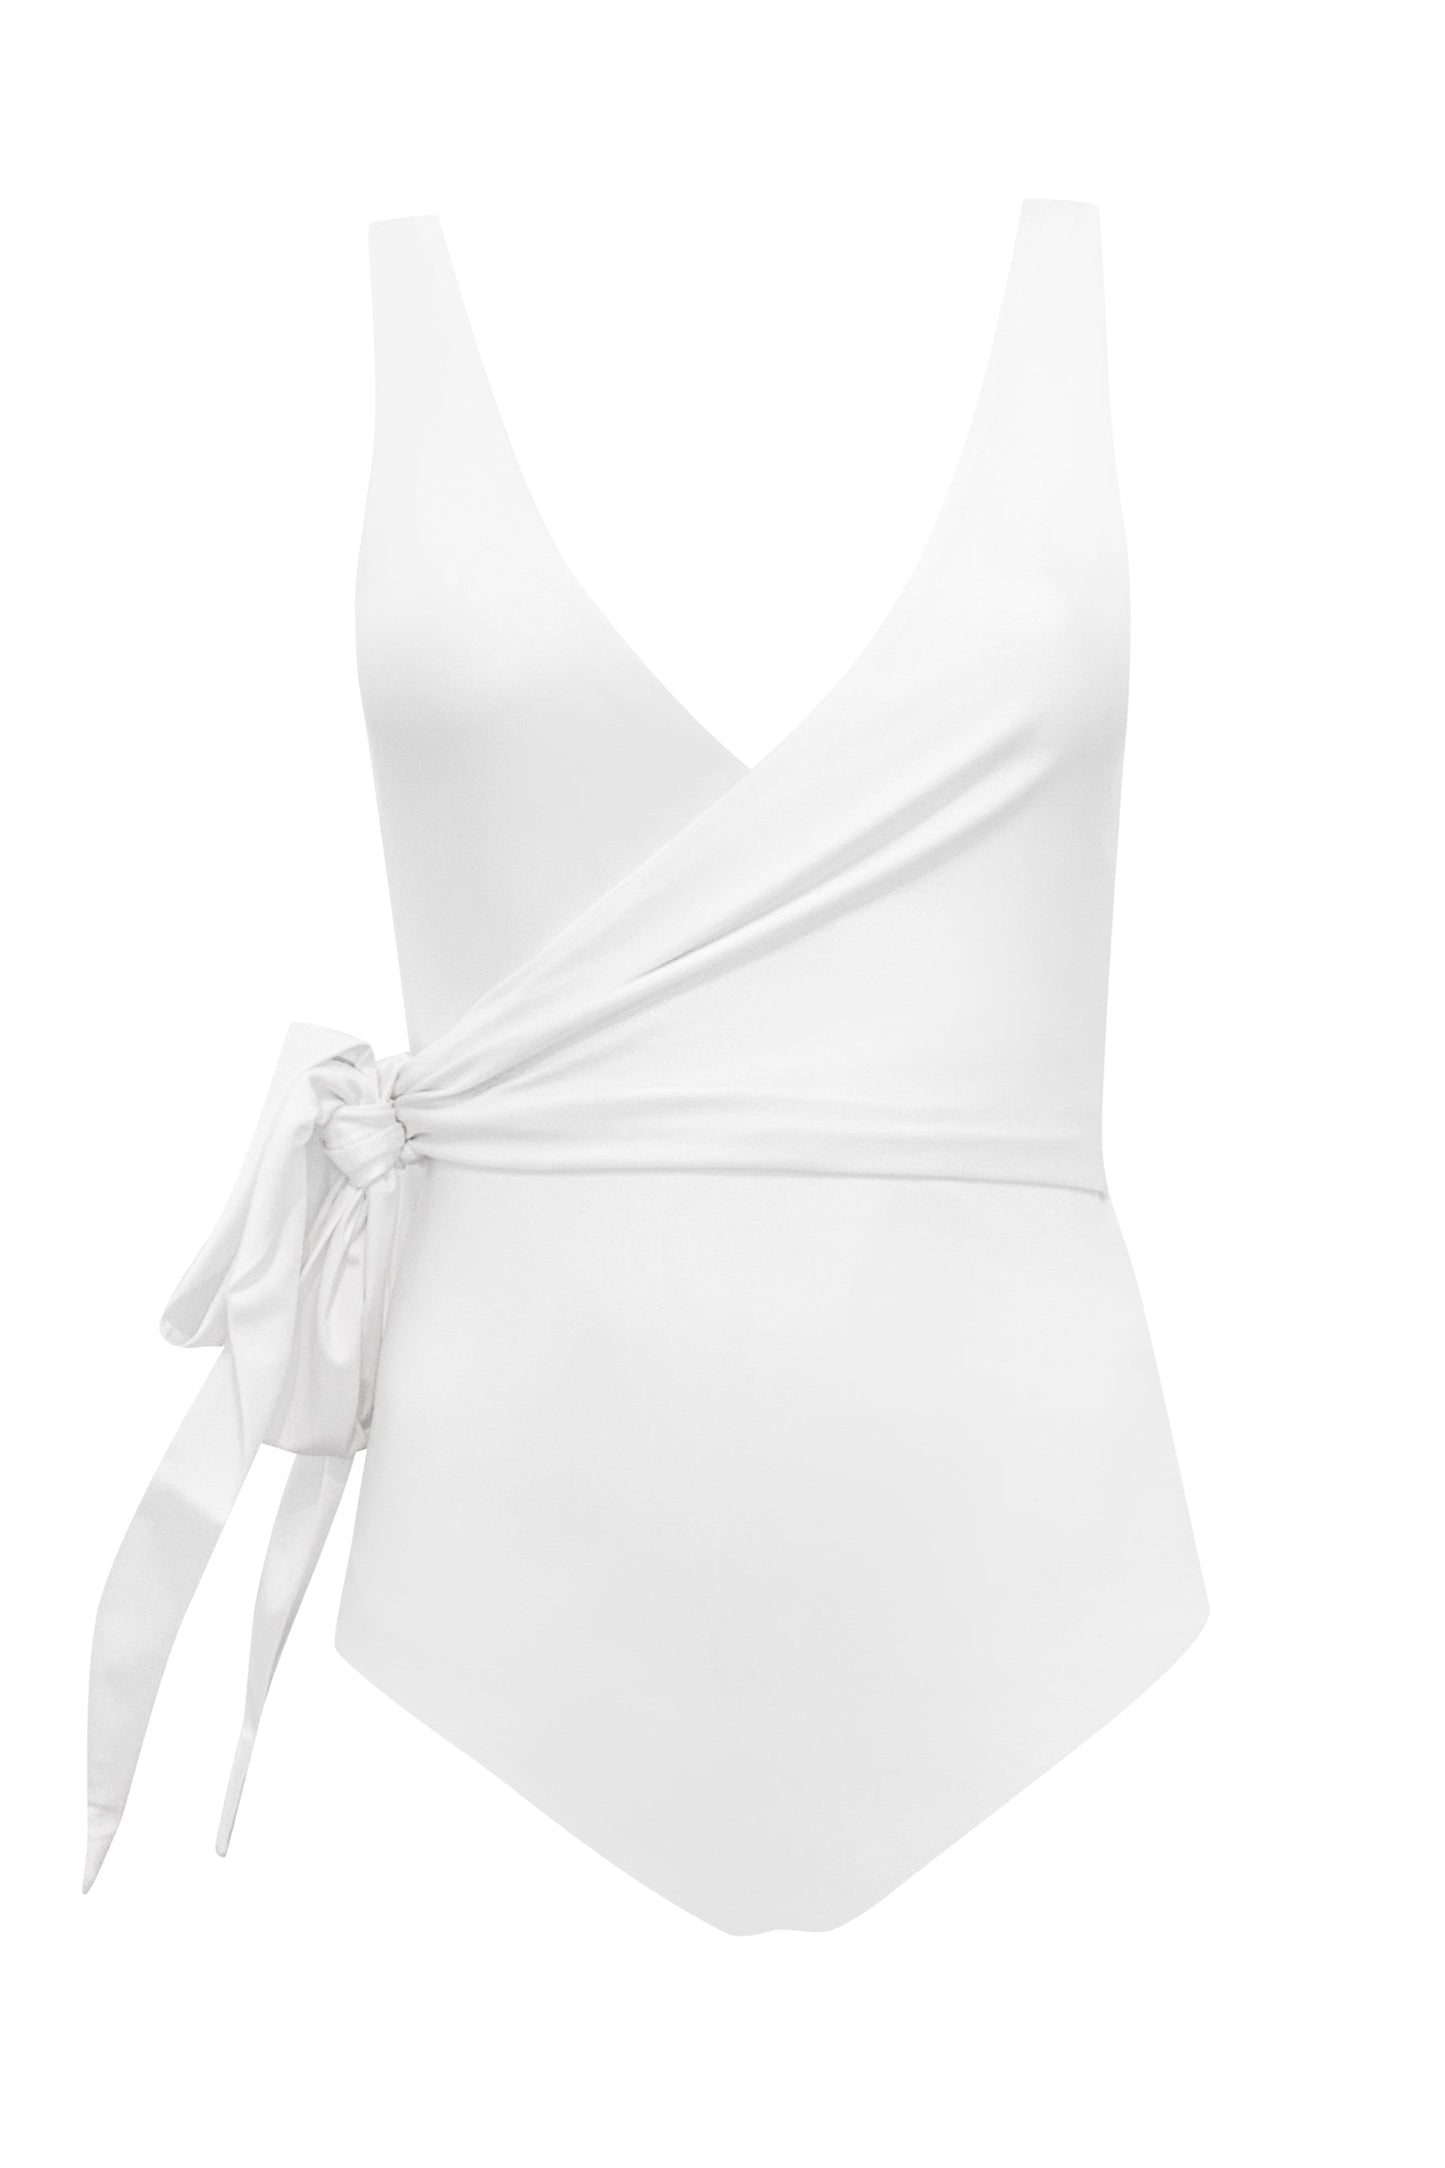 Product image of the Havana reversible wrapsuit fully reversed to the white side